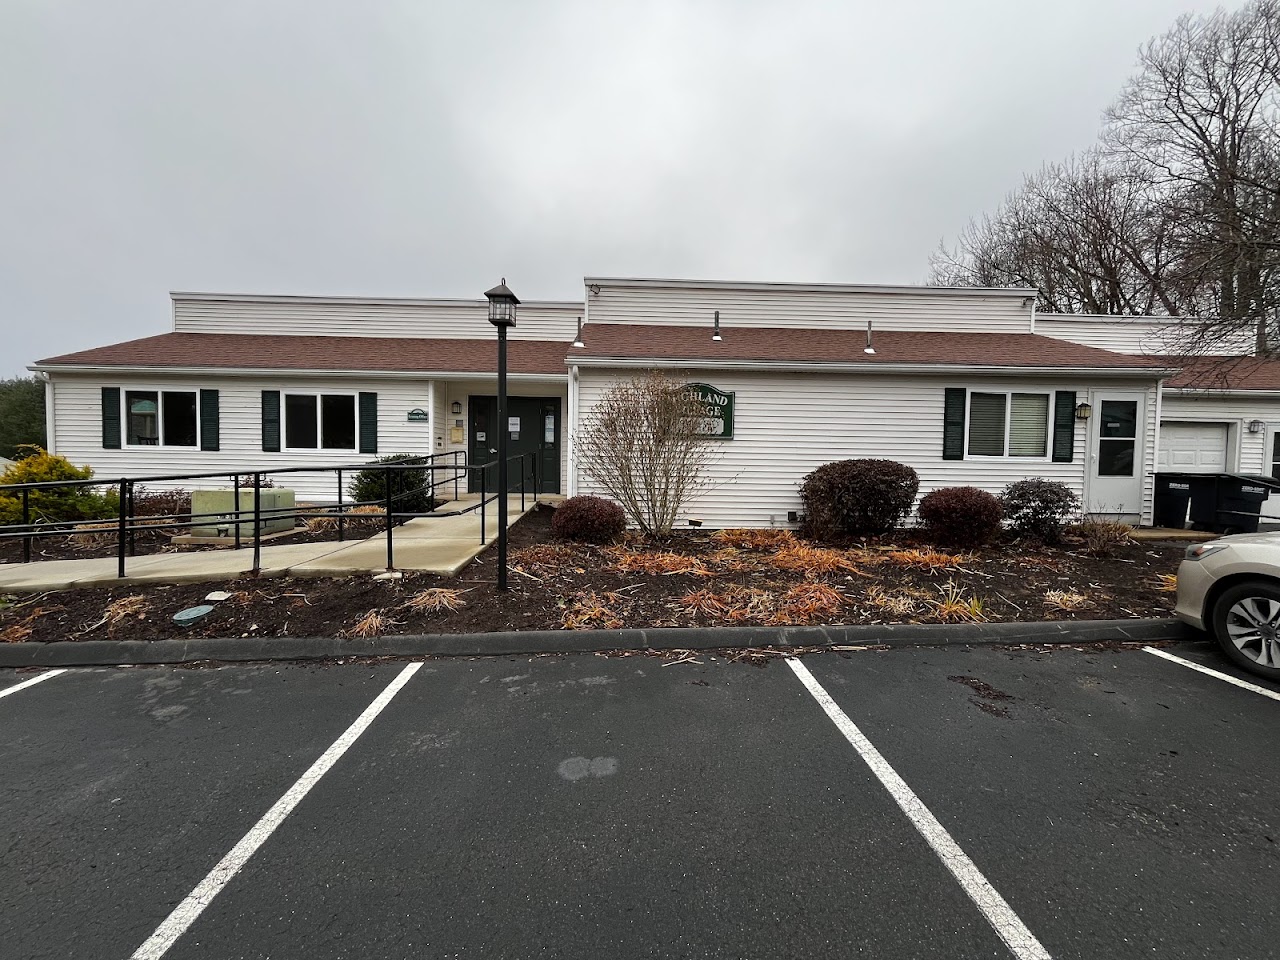 Photo of HIGHLAND VILLAGE APTS. Affordable housing located at 27 BOULDER DR WARE, MA 01082